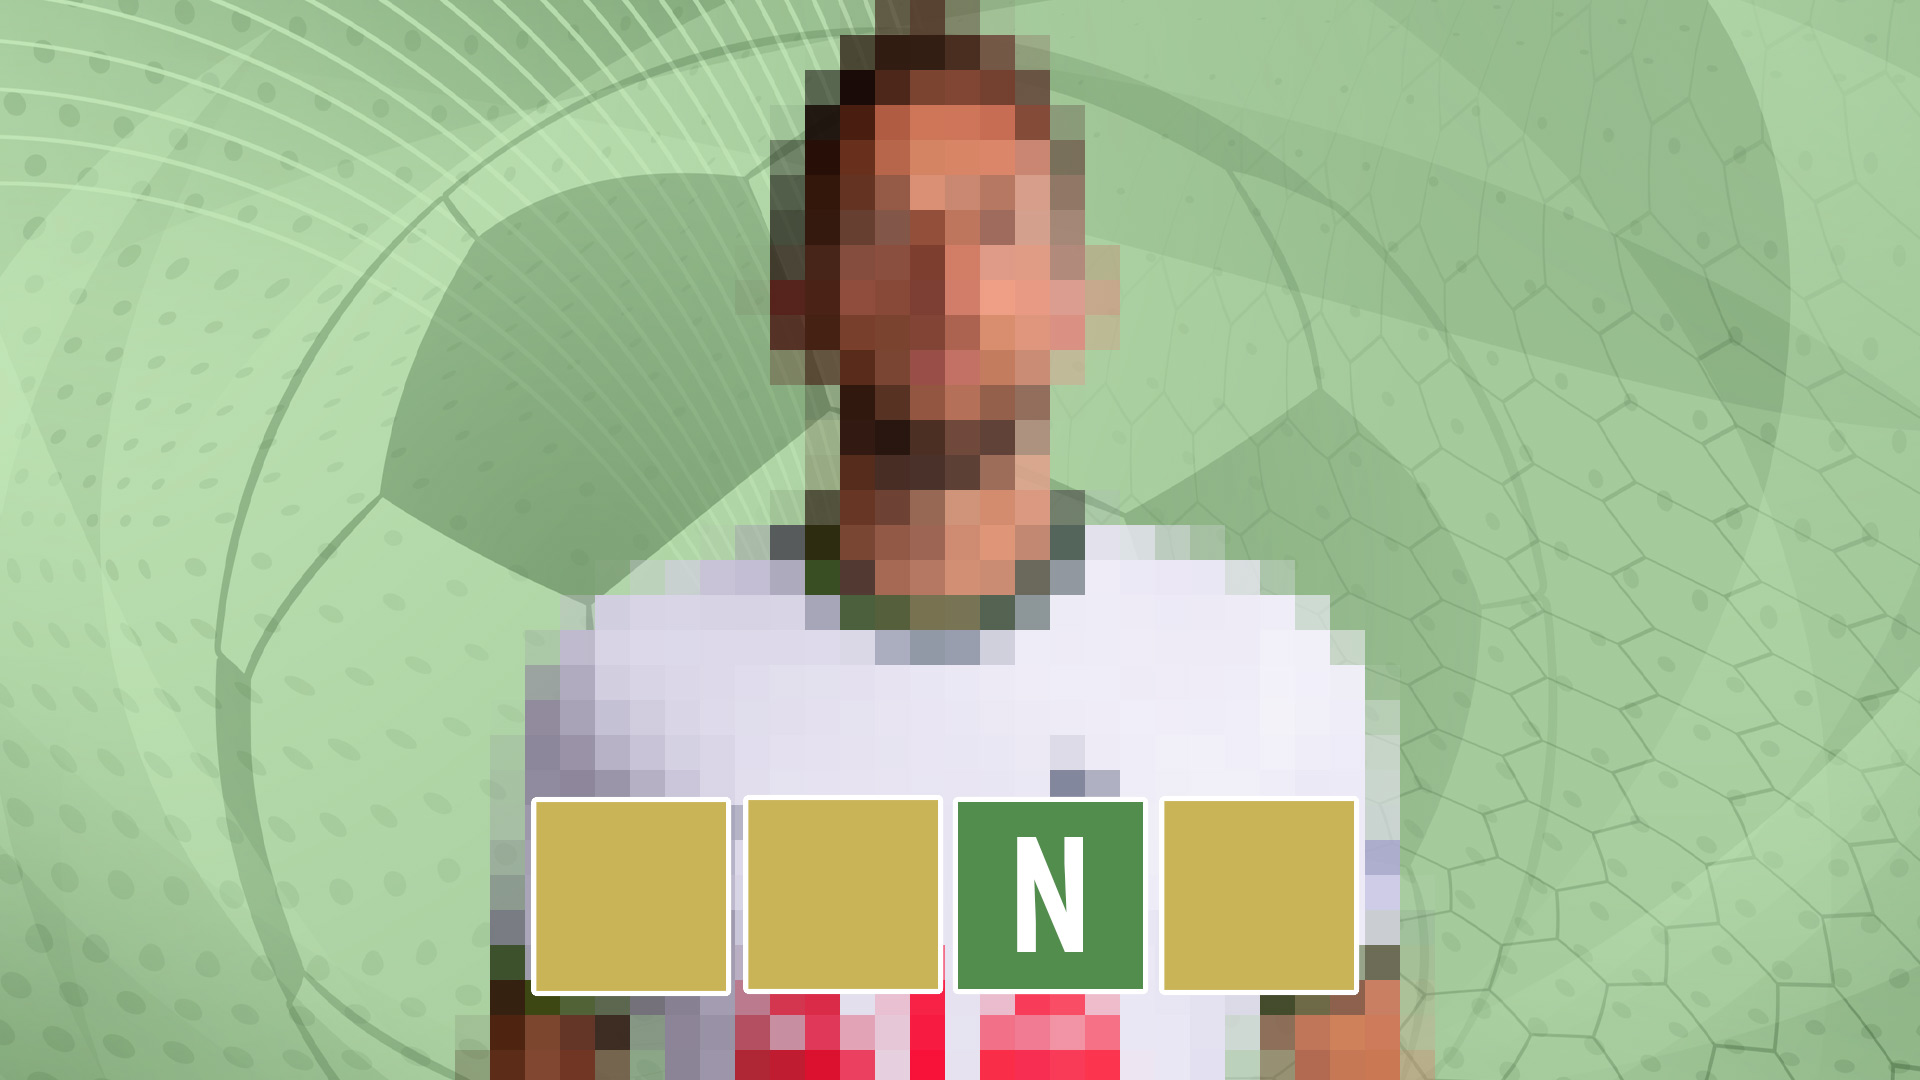 GUESS THE PLAYER - FOOTBALL WORDLE 20 